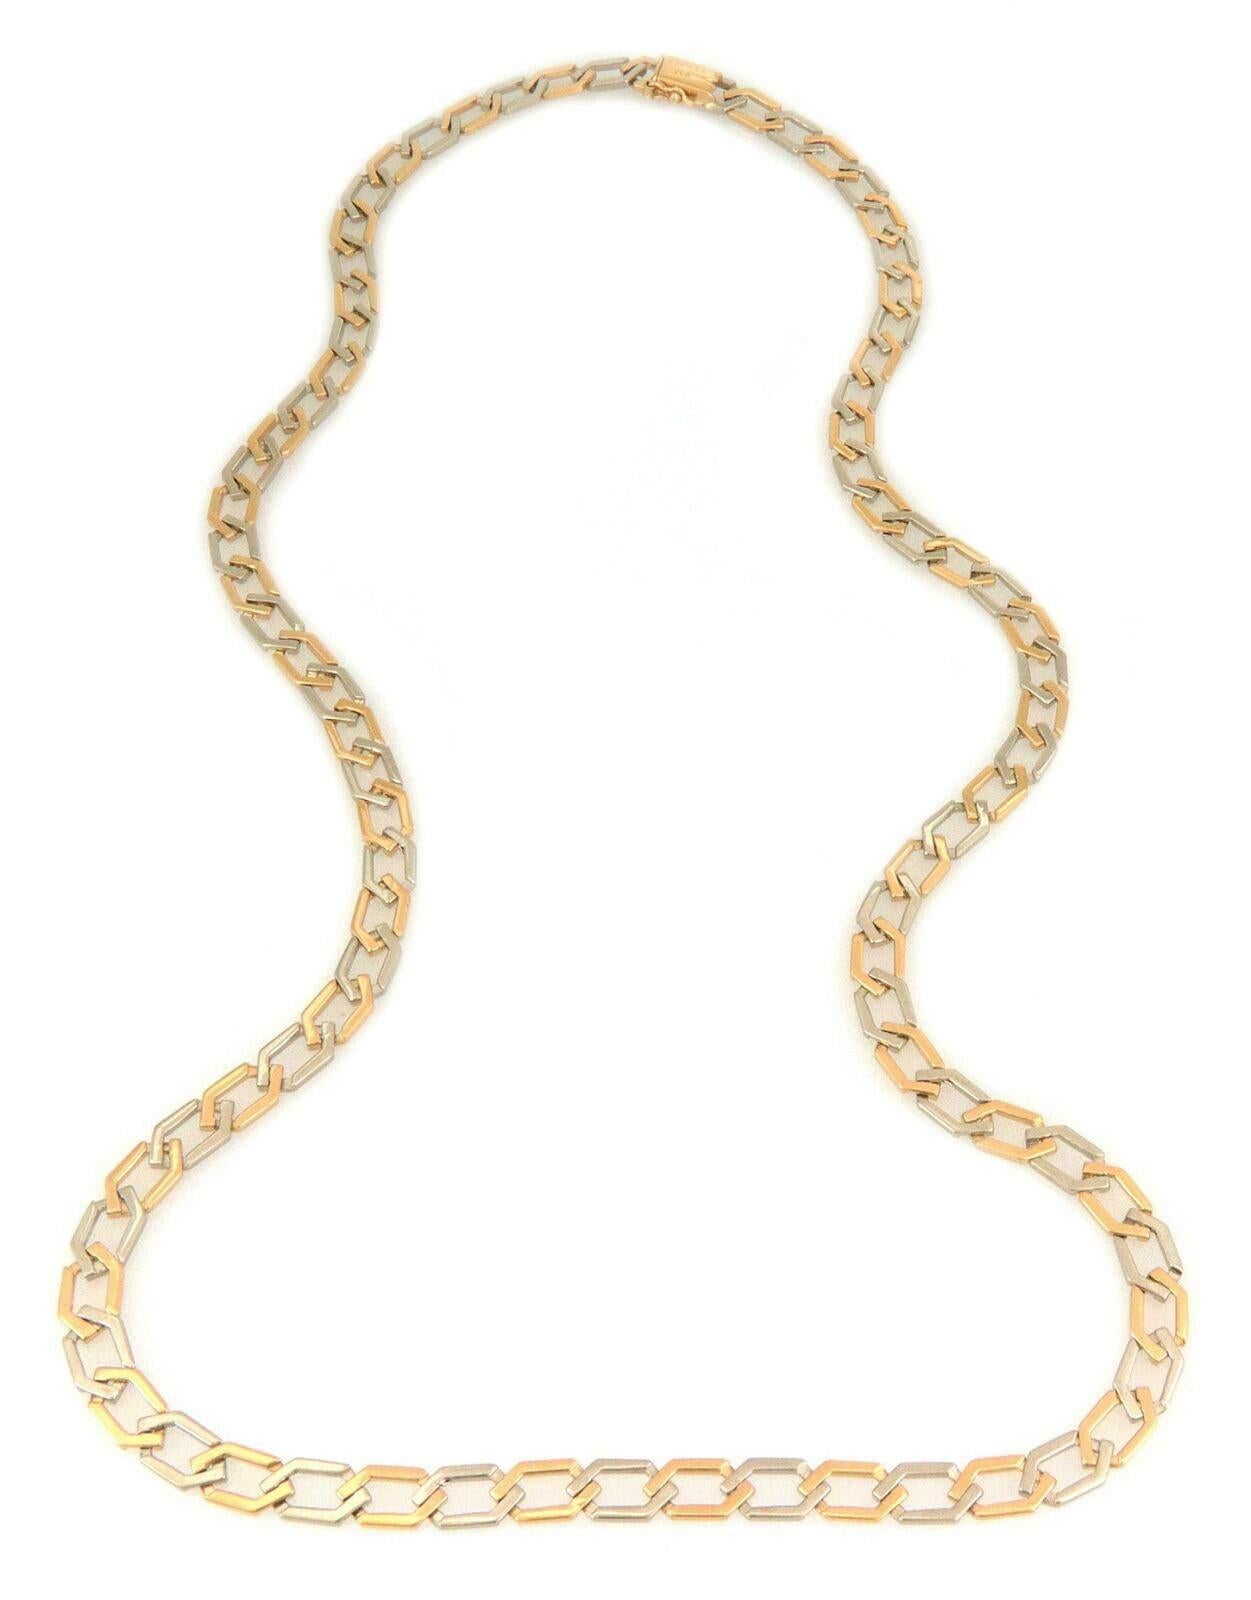 Elegant and authentic from Van Cleef & Arpels, the long chain is crafted from 18k yellow and white gold featuring alternating octagonal shape links with a polished finish. The chain is 7mm wide and thin, it secure with a box slide clasp and is